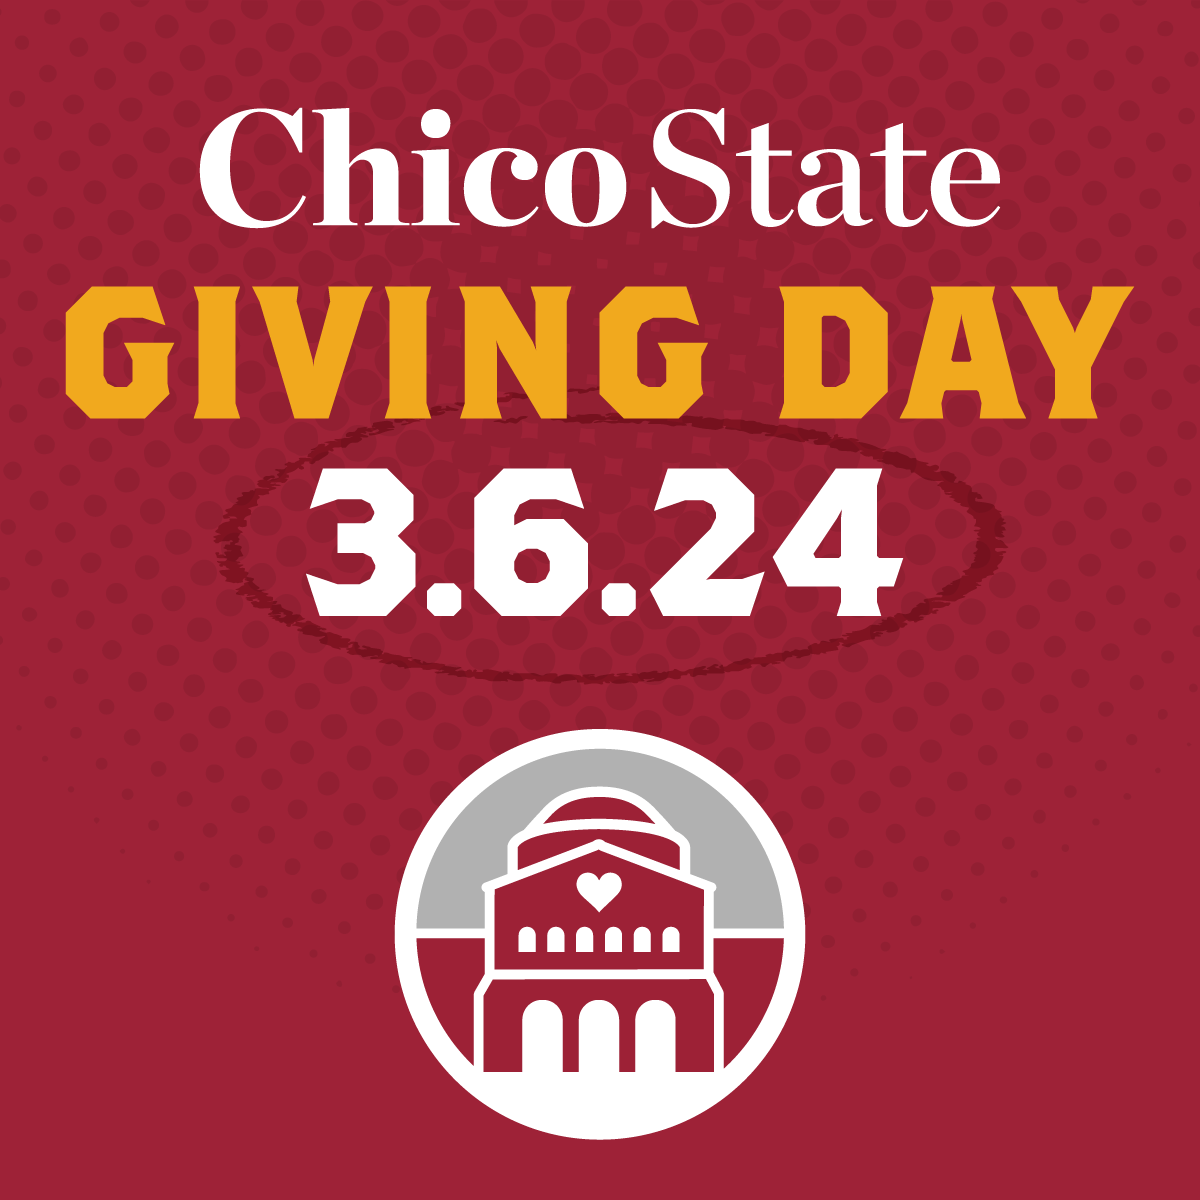 Chico State Giving Day 3-6-24